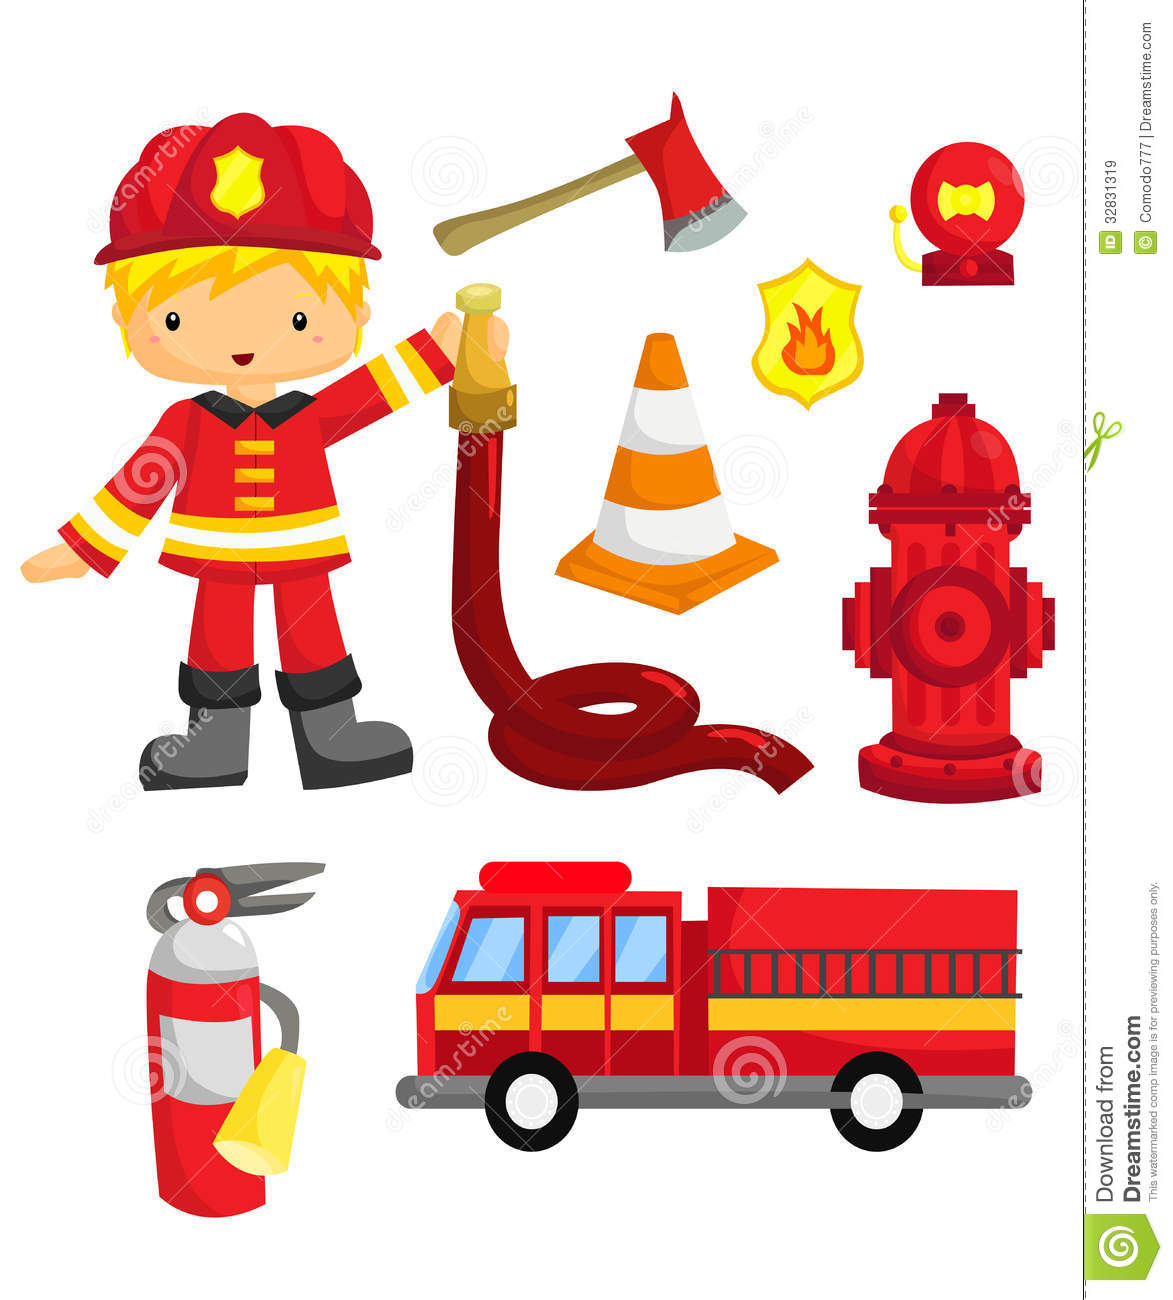 Fireman Vector Set Royalty Free Stock Images   Image  32831319